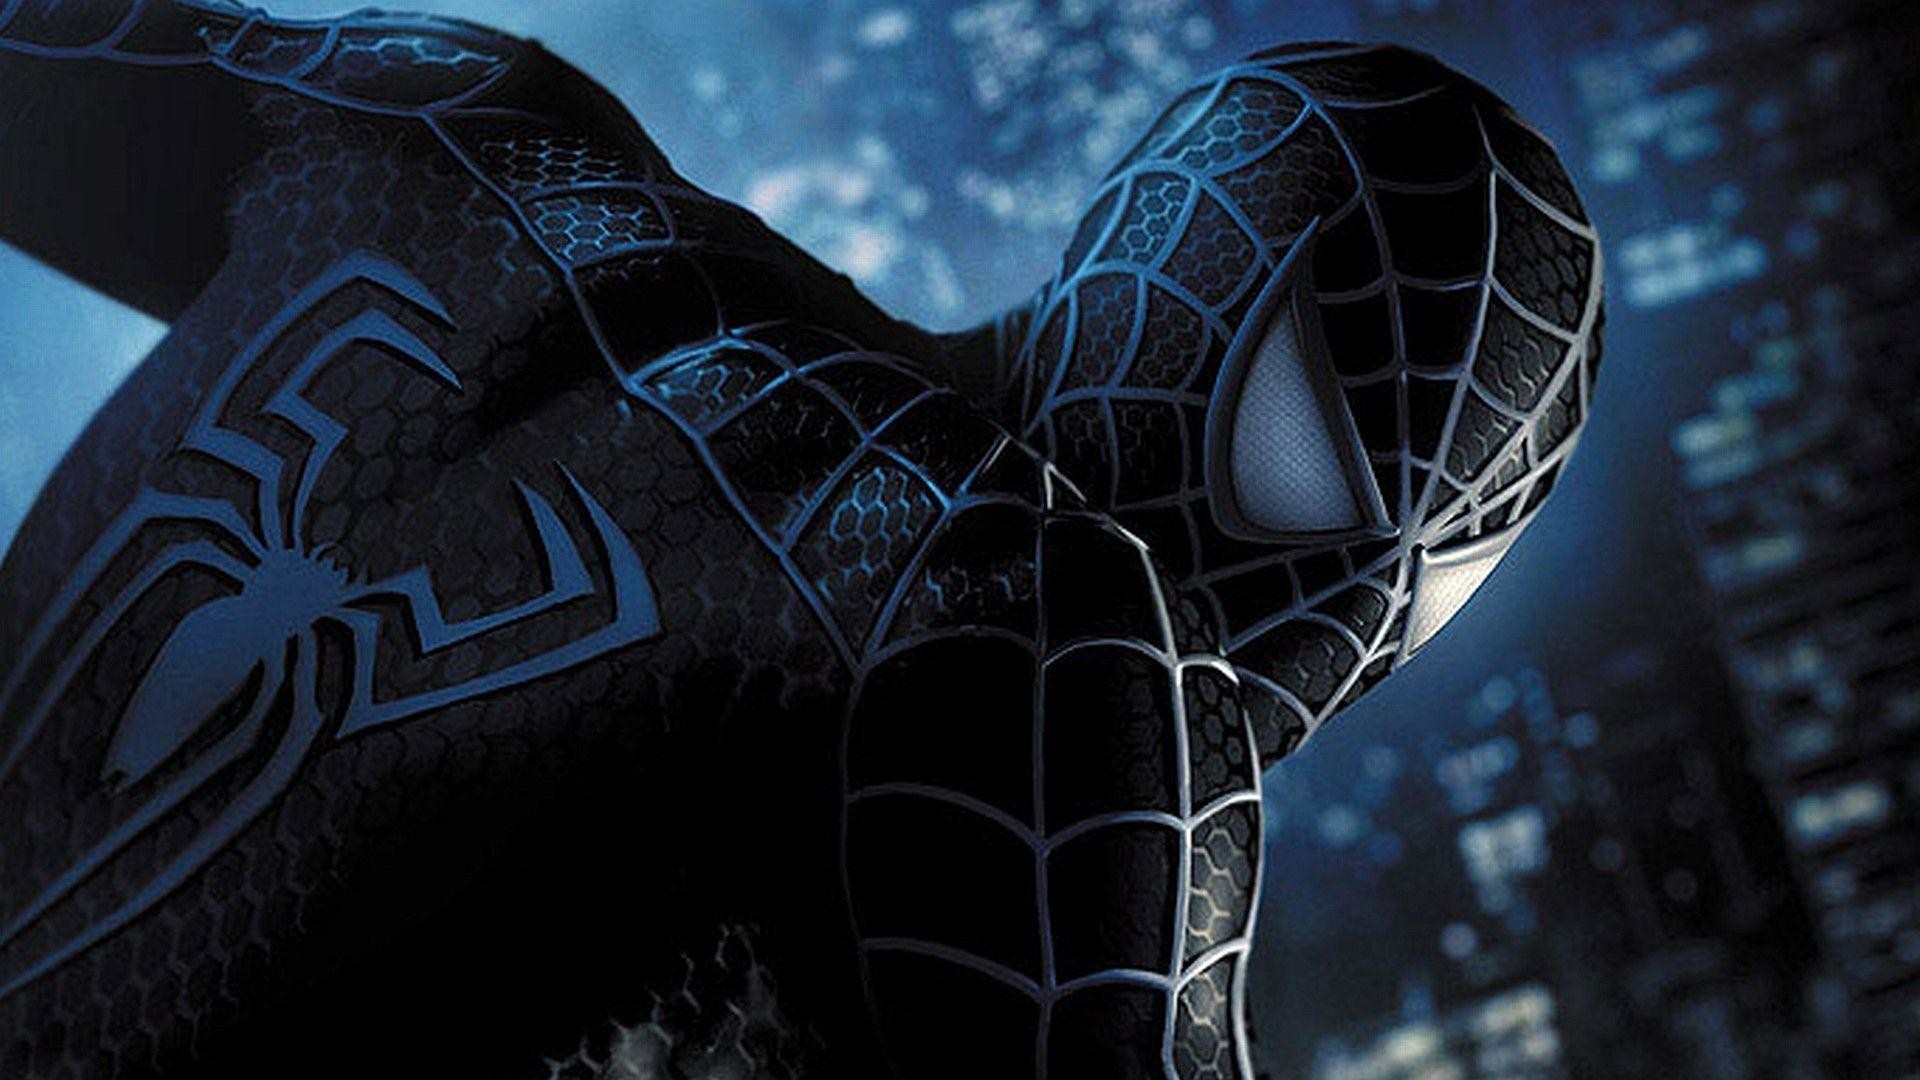 1920x1080  Spiderman-3-Wallpapers-HD-Picture Spiderman HD free wallpapers .